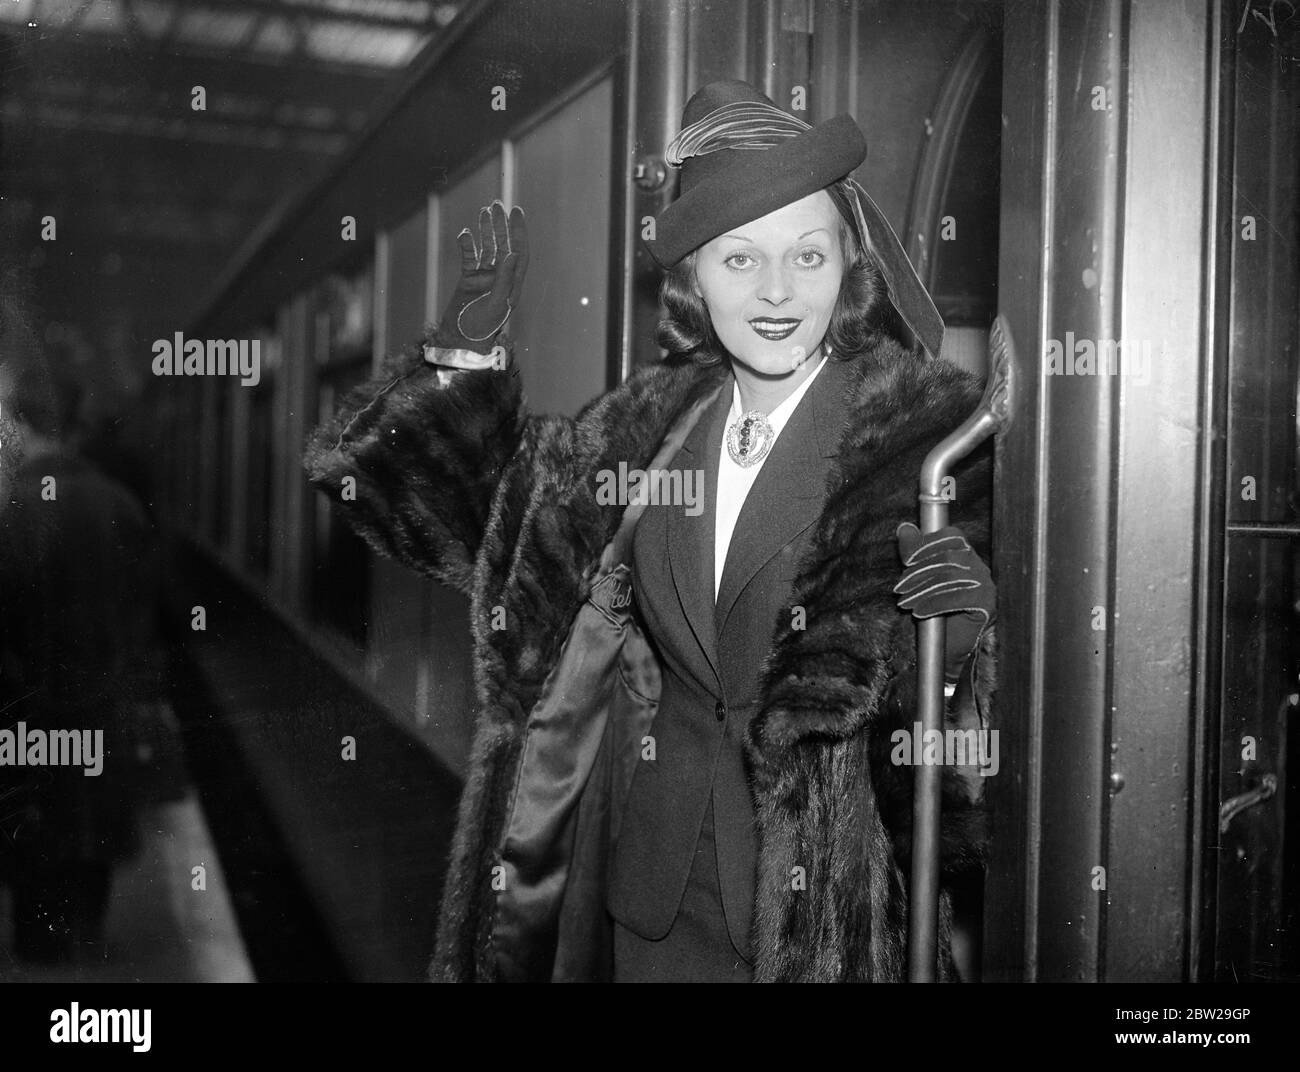 French film actress, arrived in London from Hollywood, once a dressmaker. Miss Ketti Gallian, the French film actress, who has been appearing with Warner Baxter and Fred Astaire in Hollywood, arrived at Waterloo station, London, on the 'Normandie' boat train. She may appear on the stage in London and work in British films. Miss Gallian was formerly a 'midinette' in her mother's dress shop on the Riviera. 29 November 1937 Stock Photo